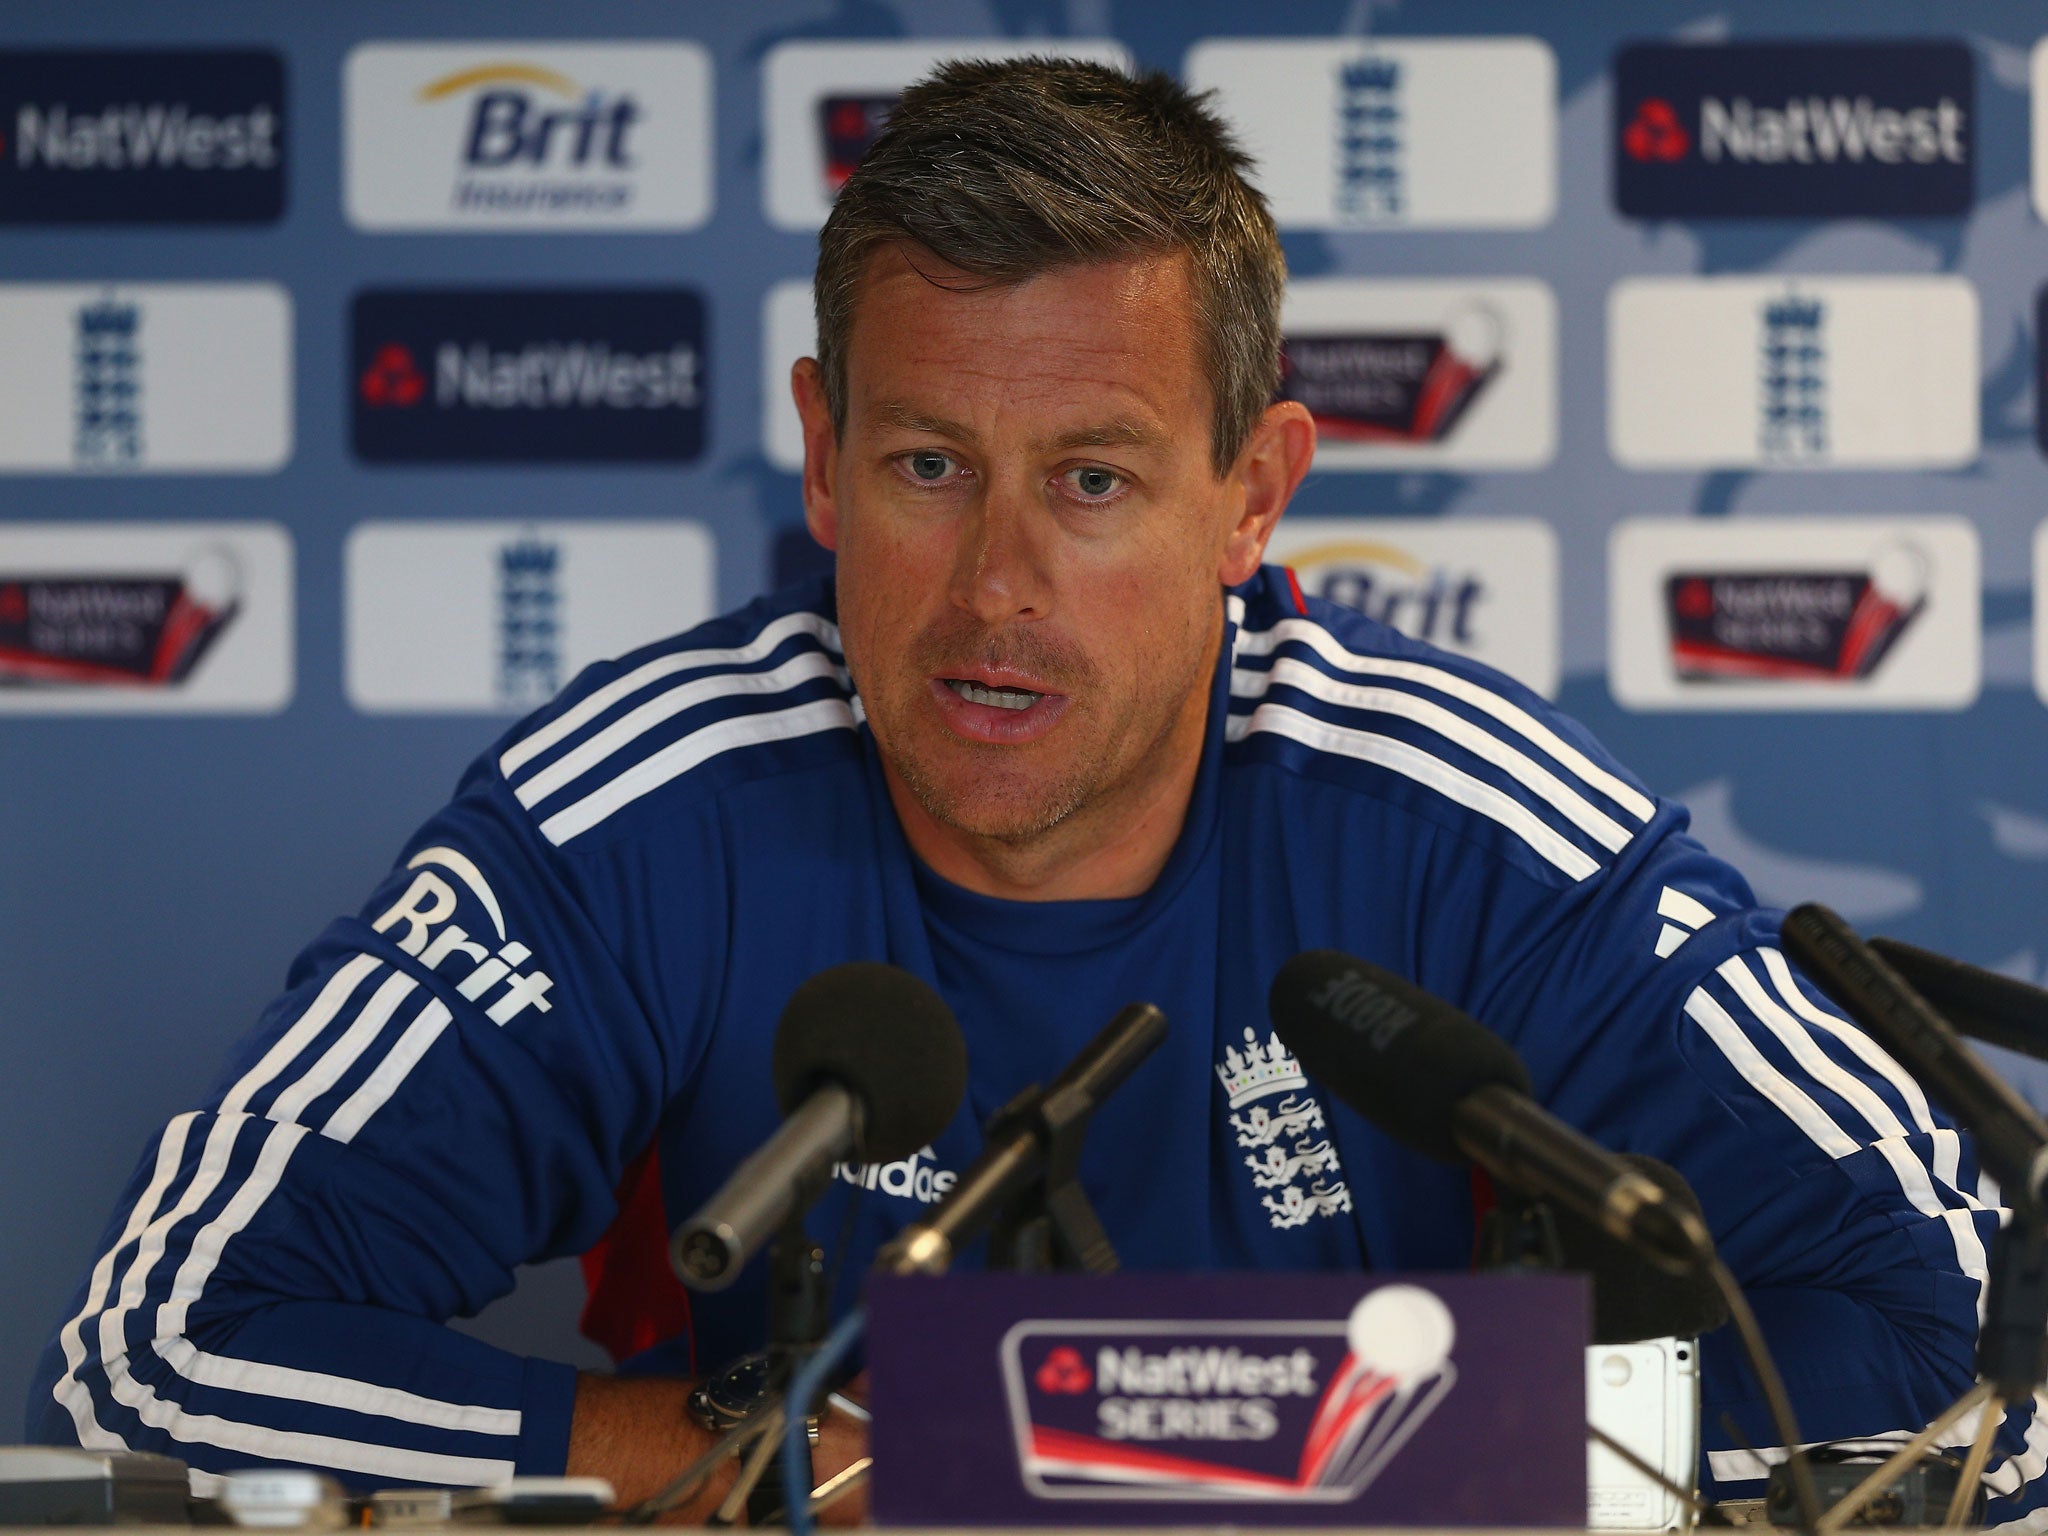 Ashley Giles (Odds: Evens)
Age 40 Nationality English
Experience Ex-England player; Warwickshire coach; now England limited-overs head coach